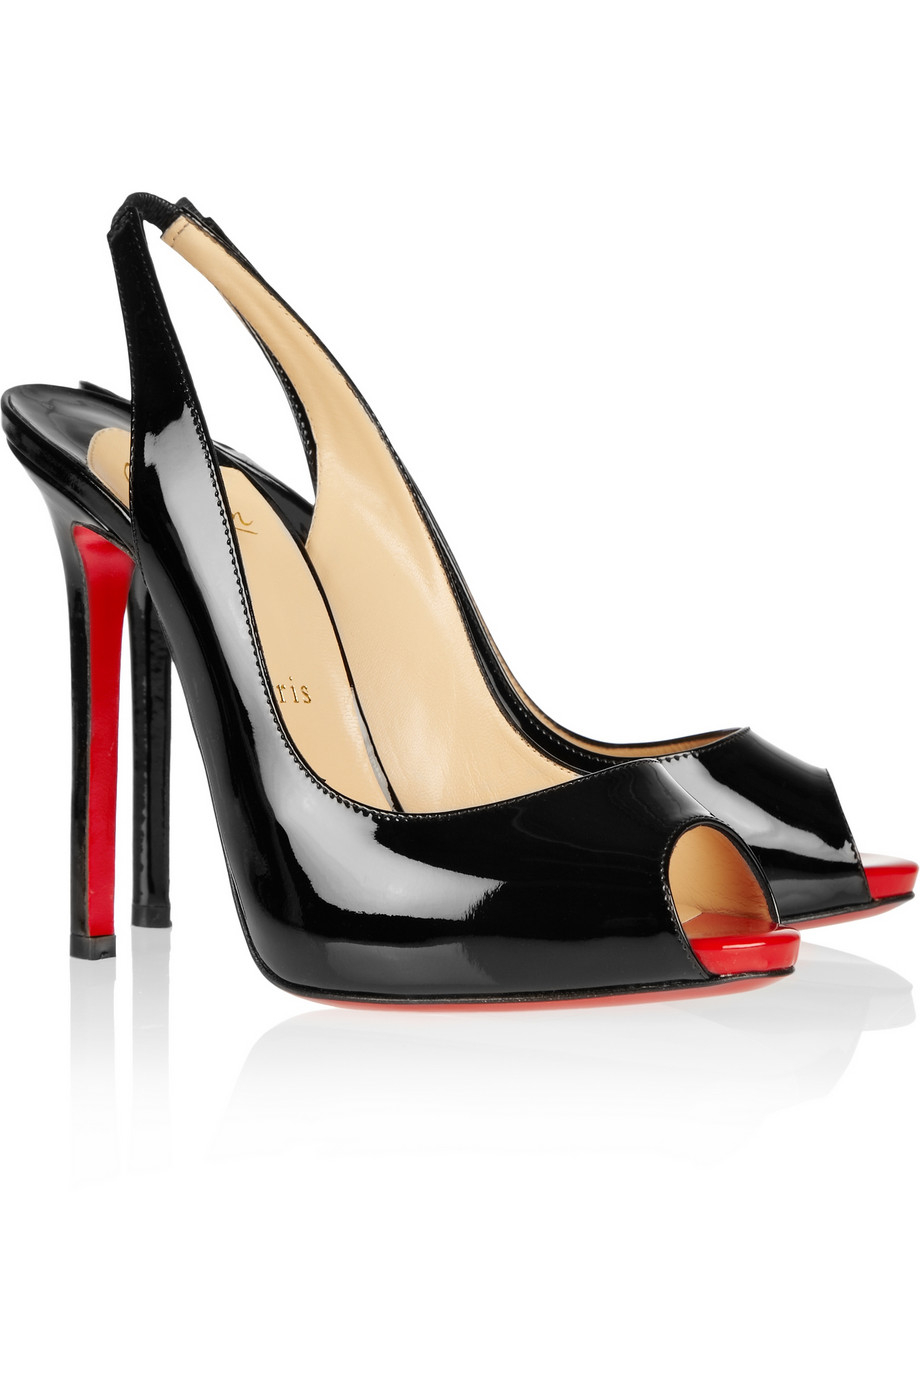 Lyst - Christian louboutin Patent Leather Slingbacks in Black